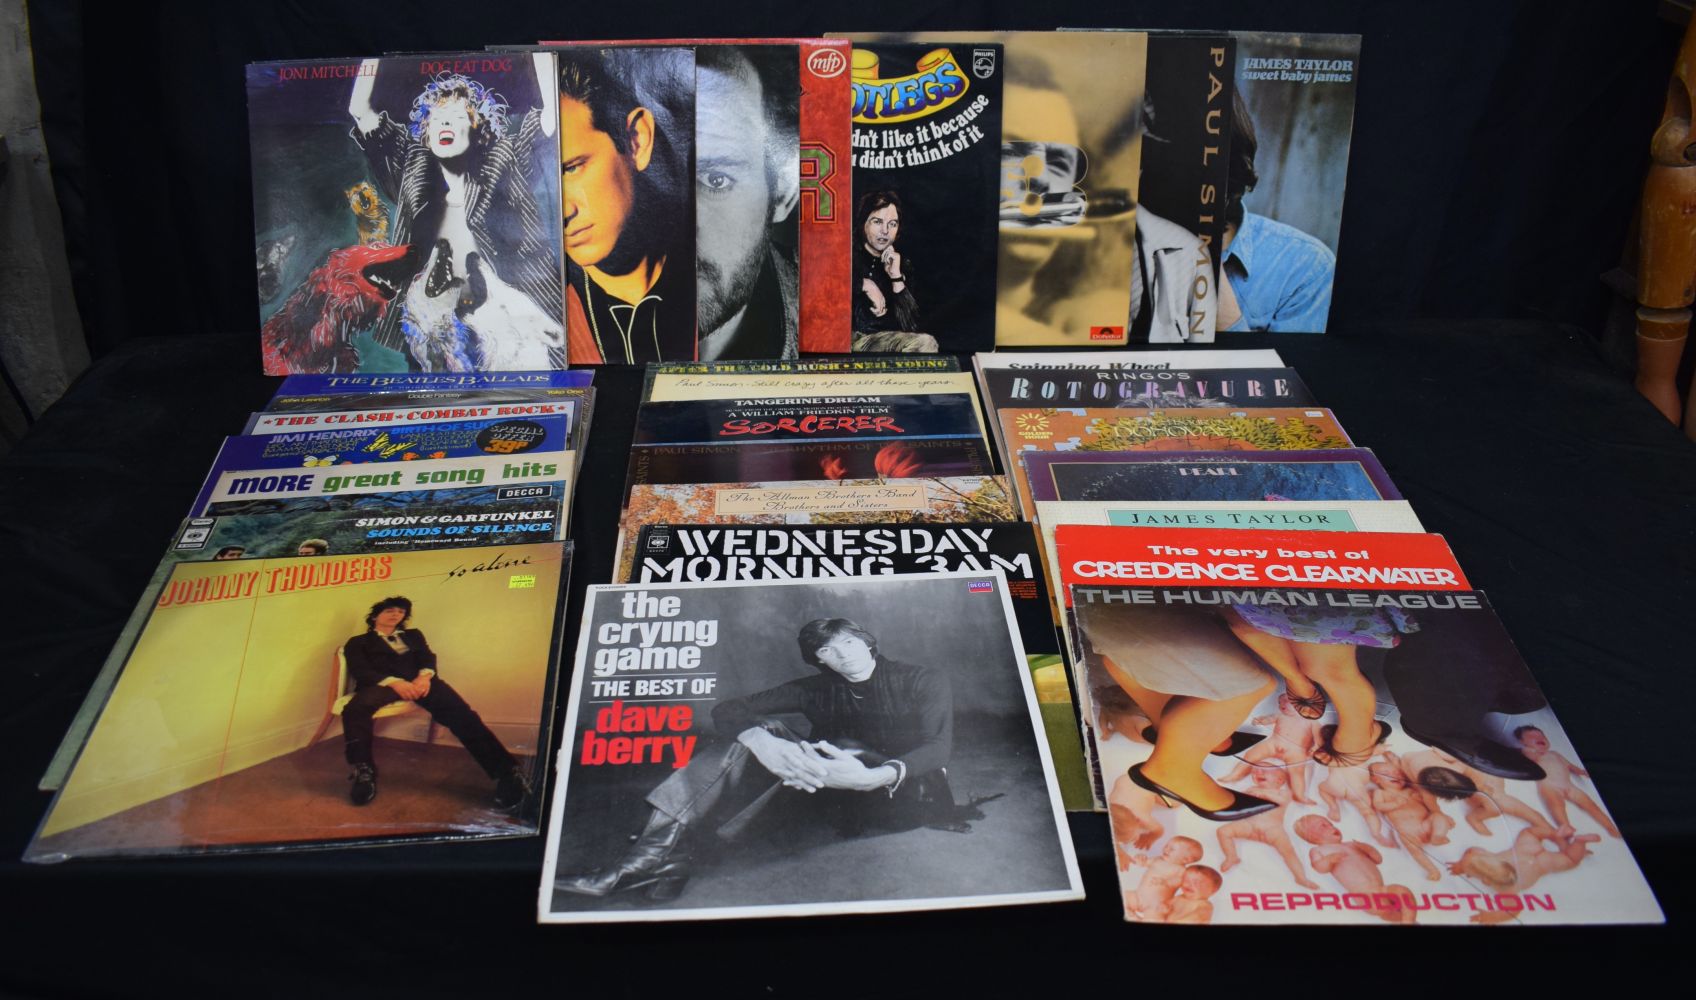 A collection of mostly 1970's LP's Neil Young, Joni Mitchell, Joe Cocker,Simon & Garfunkel,